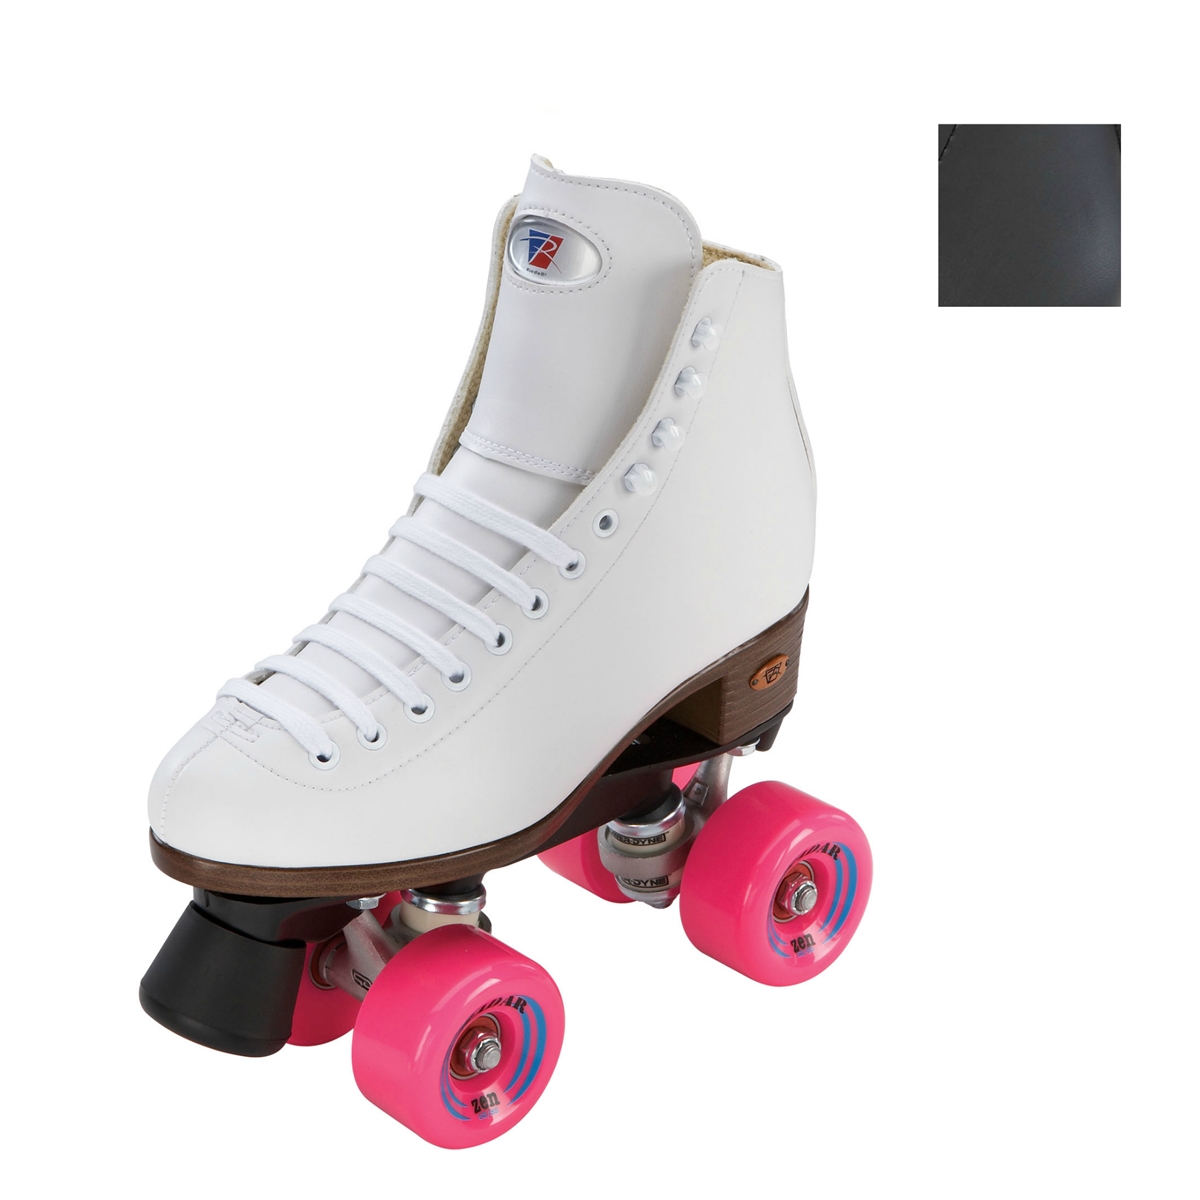 Riedell Citizen Outdoor Roller Skates | Connie's Skate Place